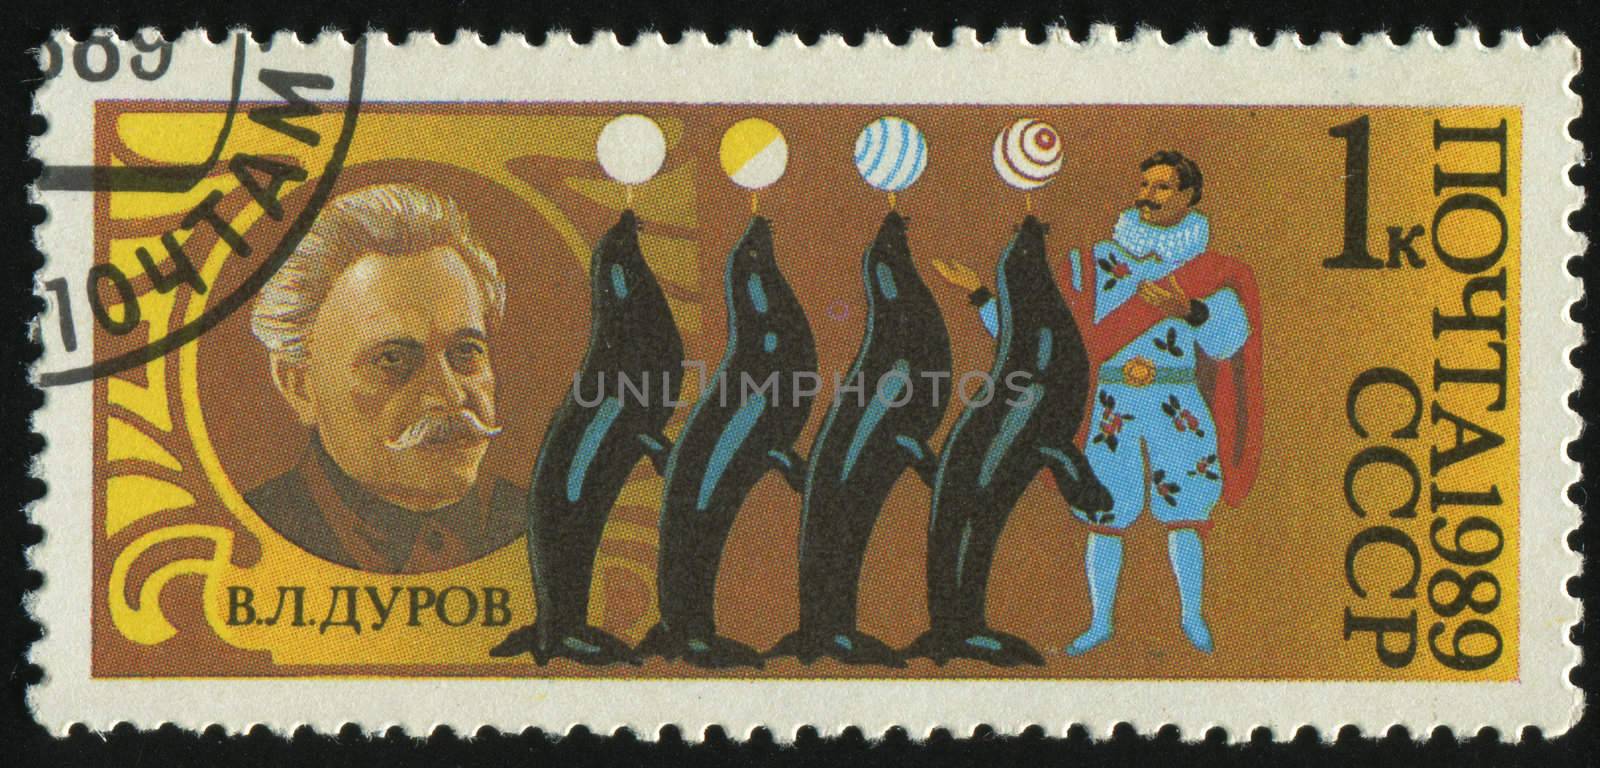 RUSSIA - CIRCA 1989: stamp printed by Russia, shows  Durov, clown and trainer, circa 1989.